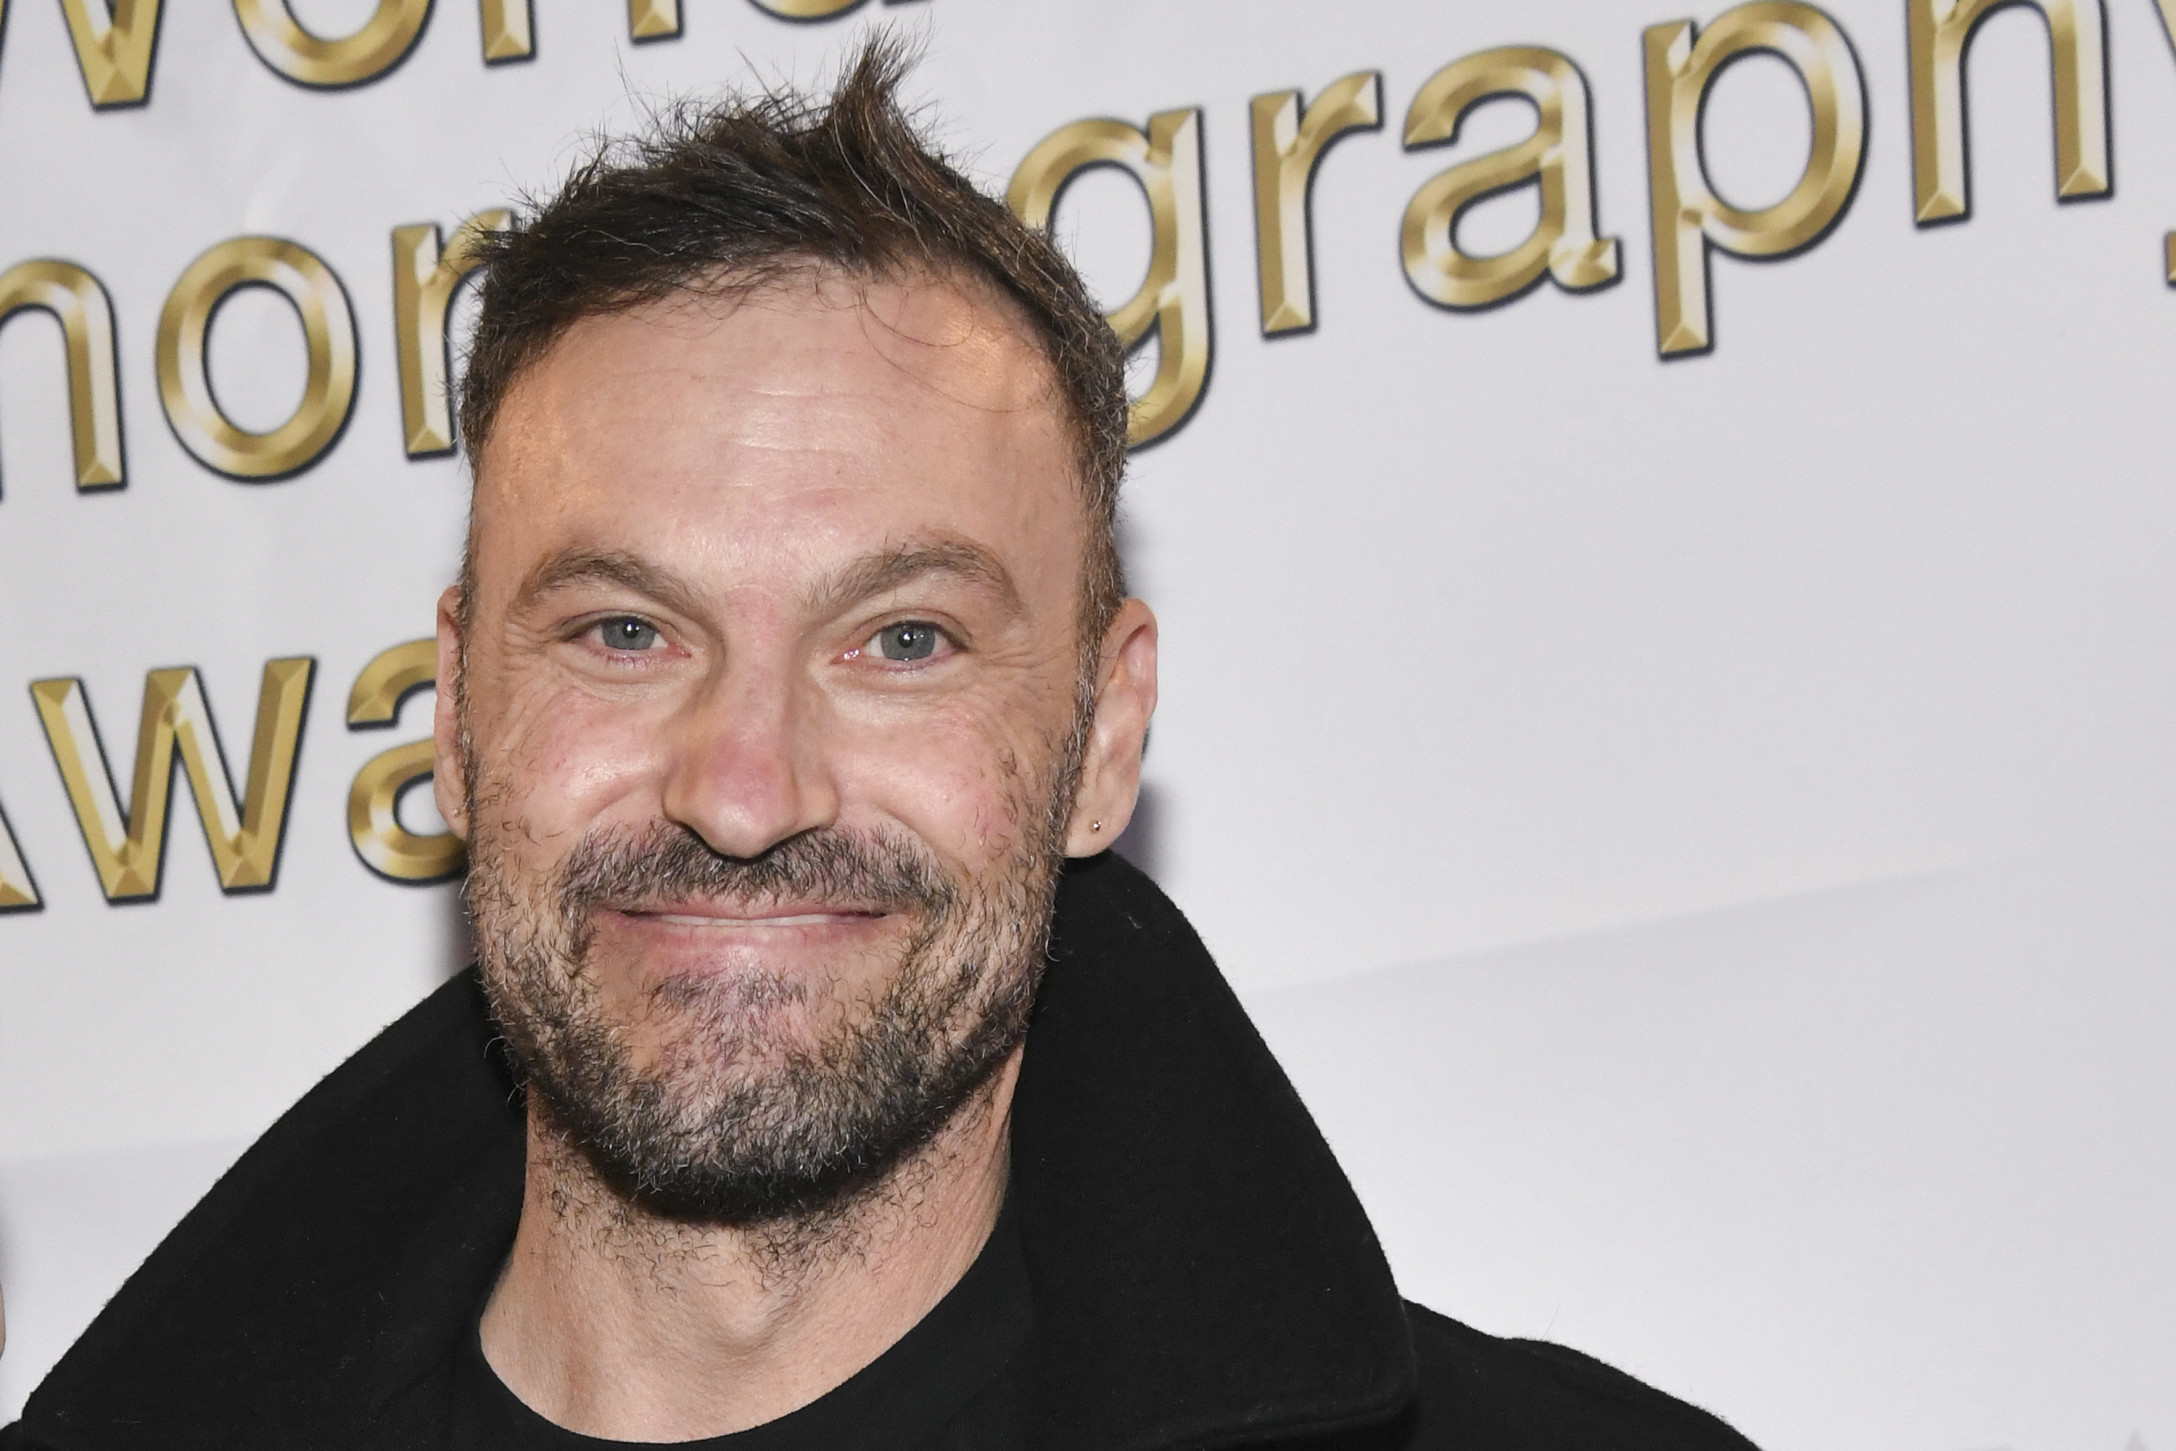 Brian Austin Green Opens Up About Losing 20 Pounds Amid Severe Health Struggle